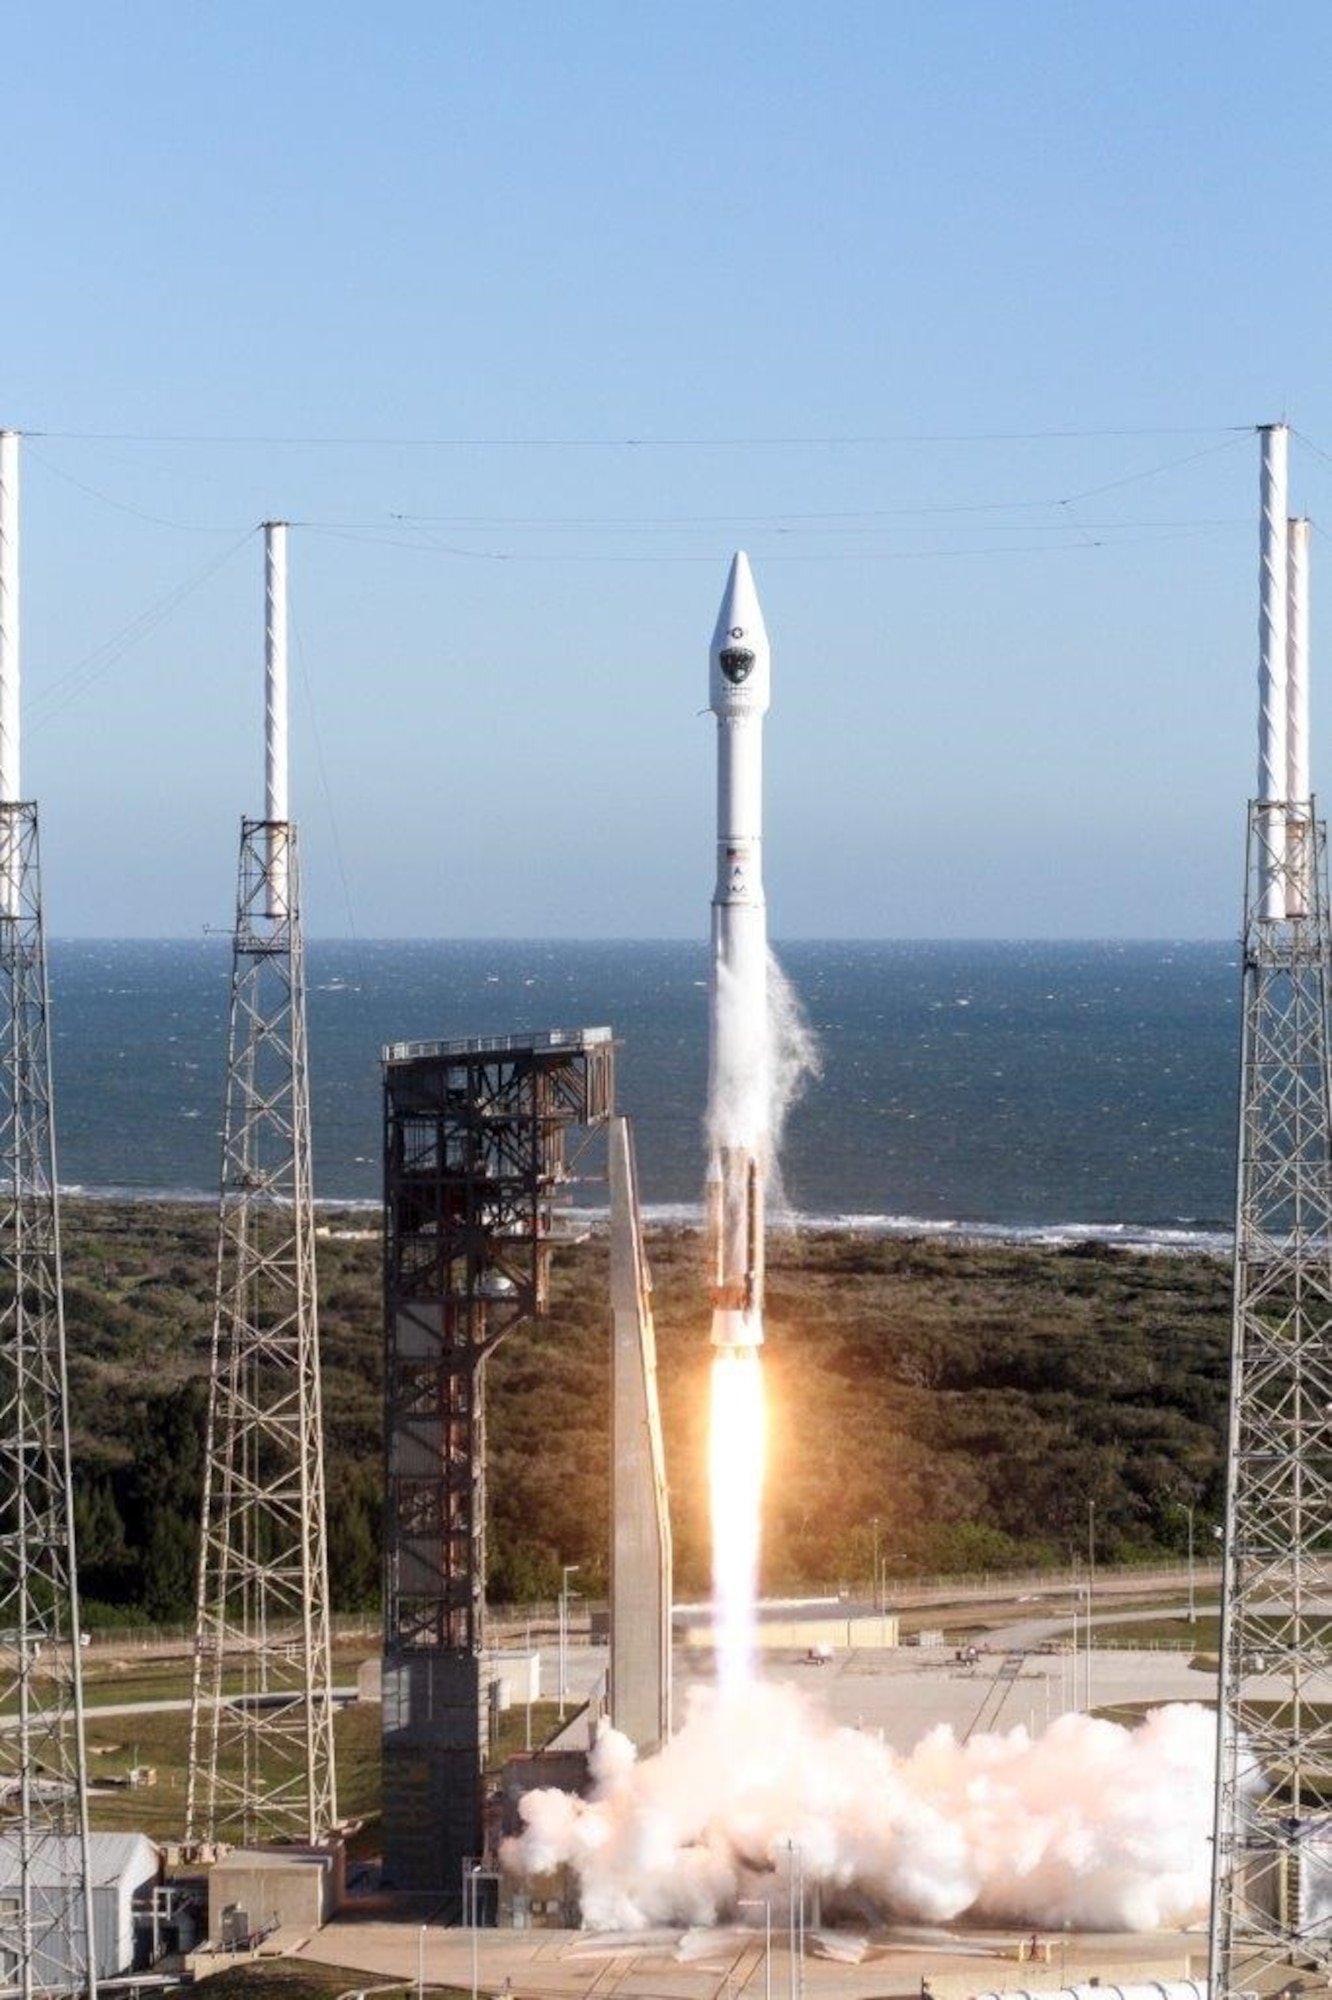 Cape Canaveral Air Force Station, Fla. (Feb. 5, 2016) – A United Launch Alliance (ULA) Atlas V rocket carrying the GPS IIF-12  mission lifted off from Space Launch Complex 41 at 8:38 a.m. EST / 5:38 a.m. PST (Courtesy photo: ULA) 